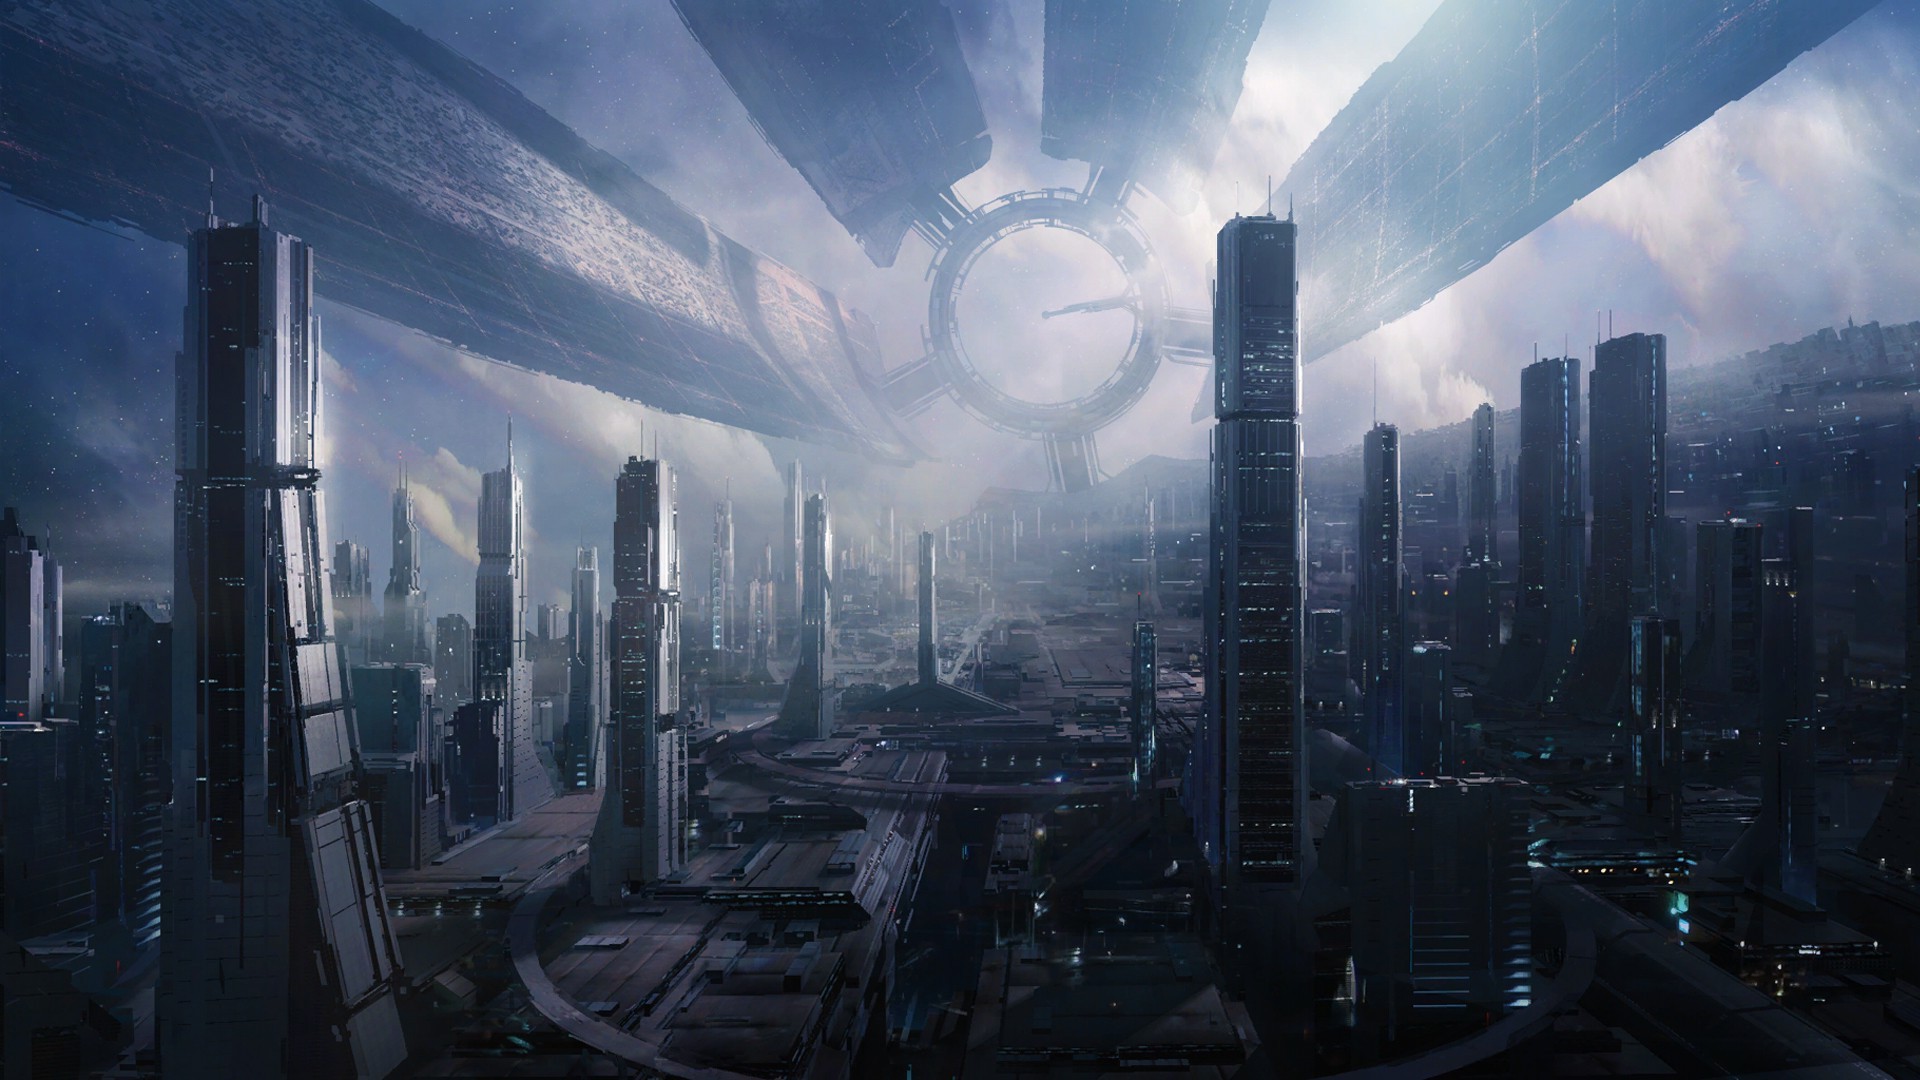 Citadel (Mass Effect), Mass Effect 3, Mass Effect 2, Mass Effect, Space Station Wallpaper